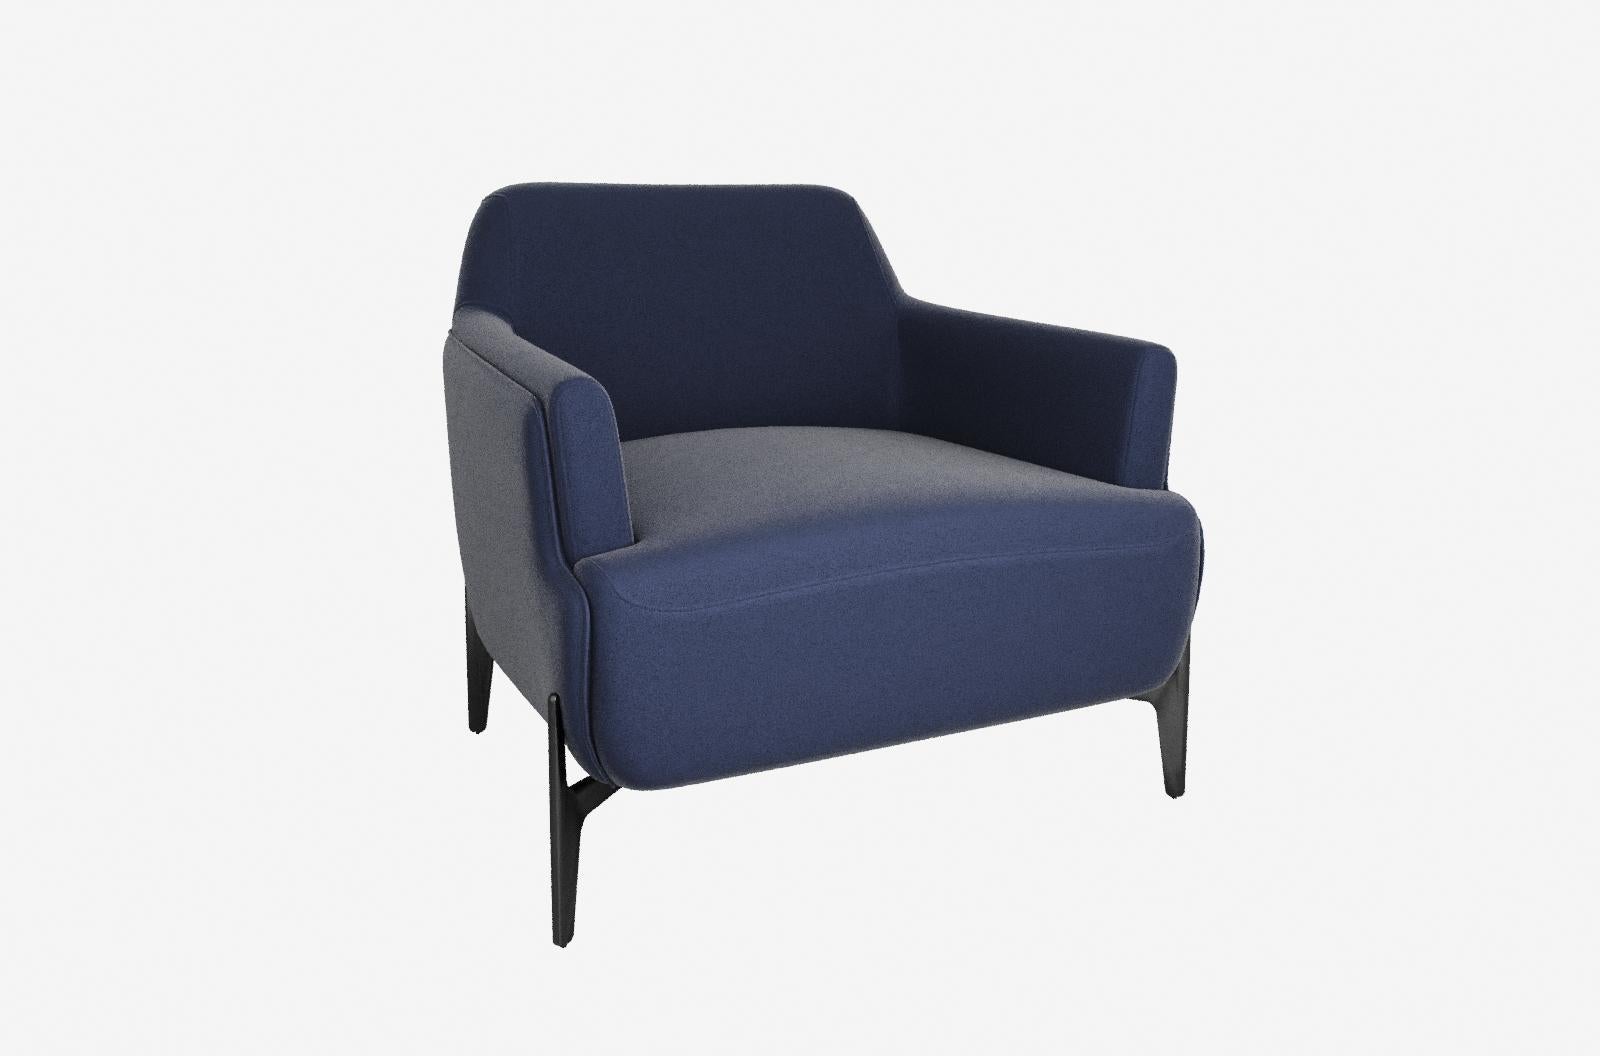 The Colorado armchair, an exclusive piece, has its curvy design inspired by contemporary Japanese architecture. It features details that combine smoothness and precision.
Highlight the thin outer shell that surrounds the entire piece, reinforcing